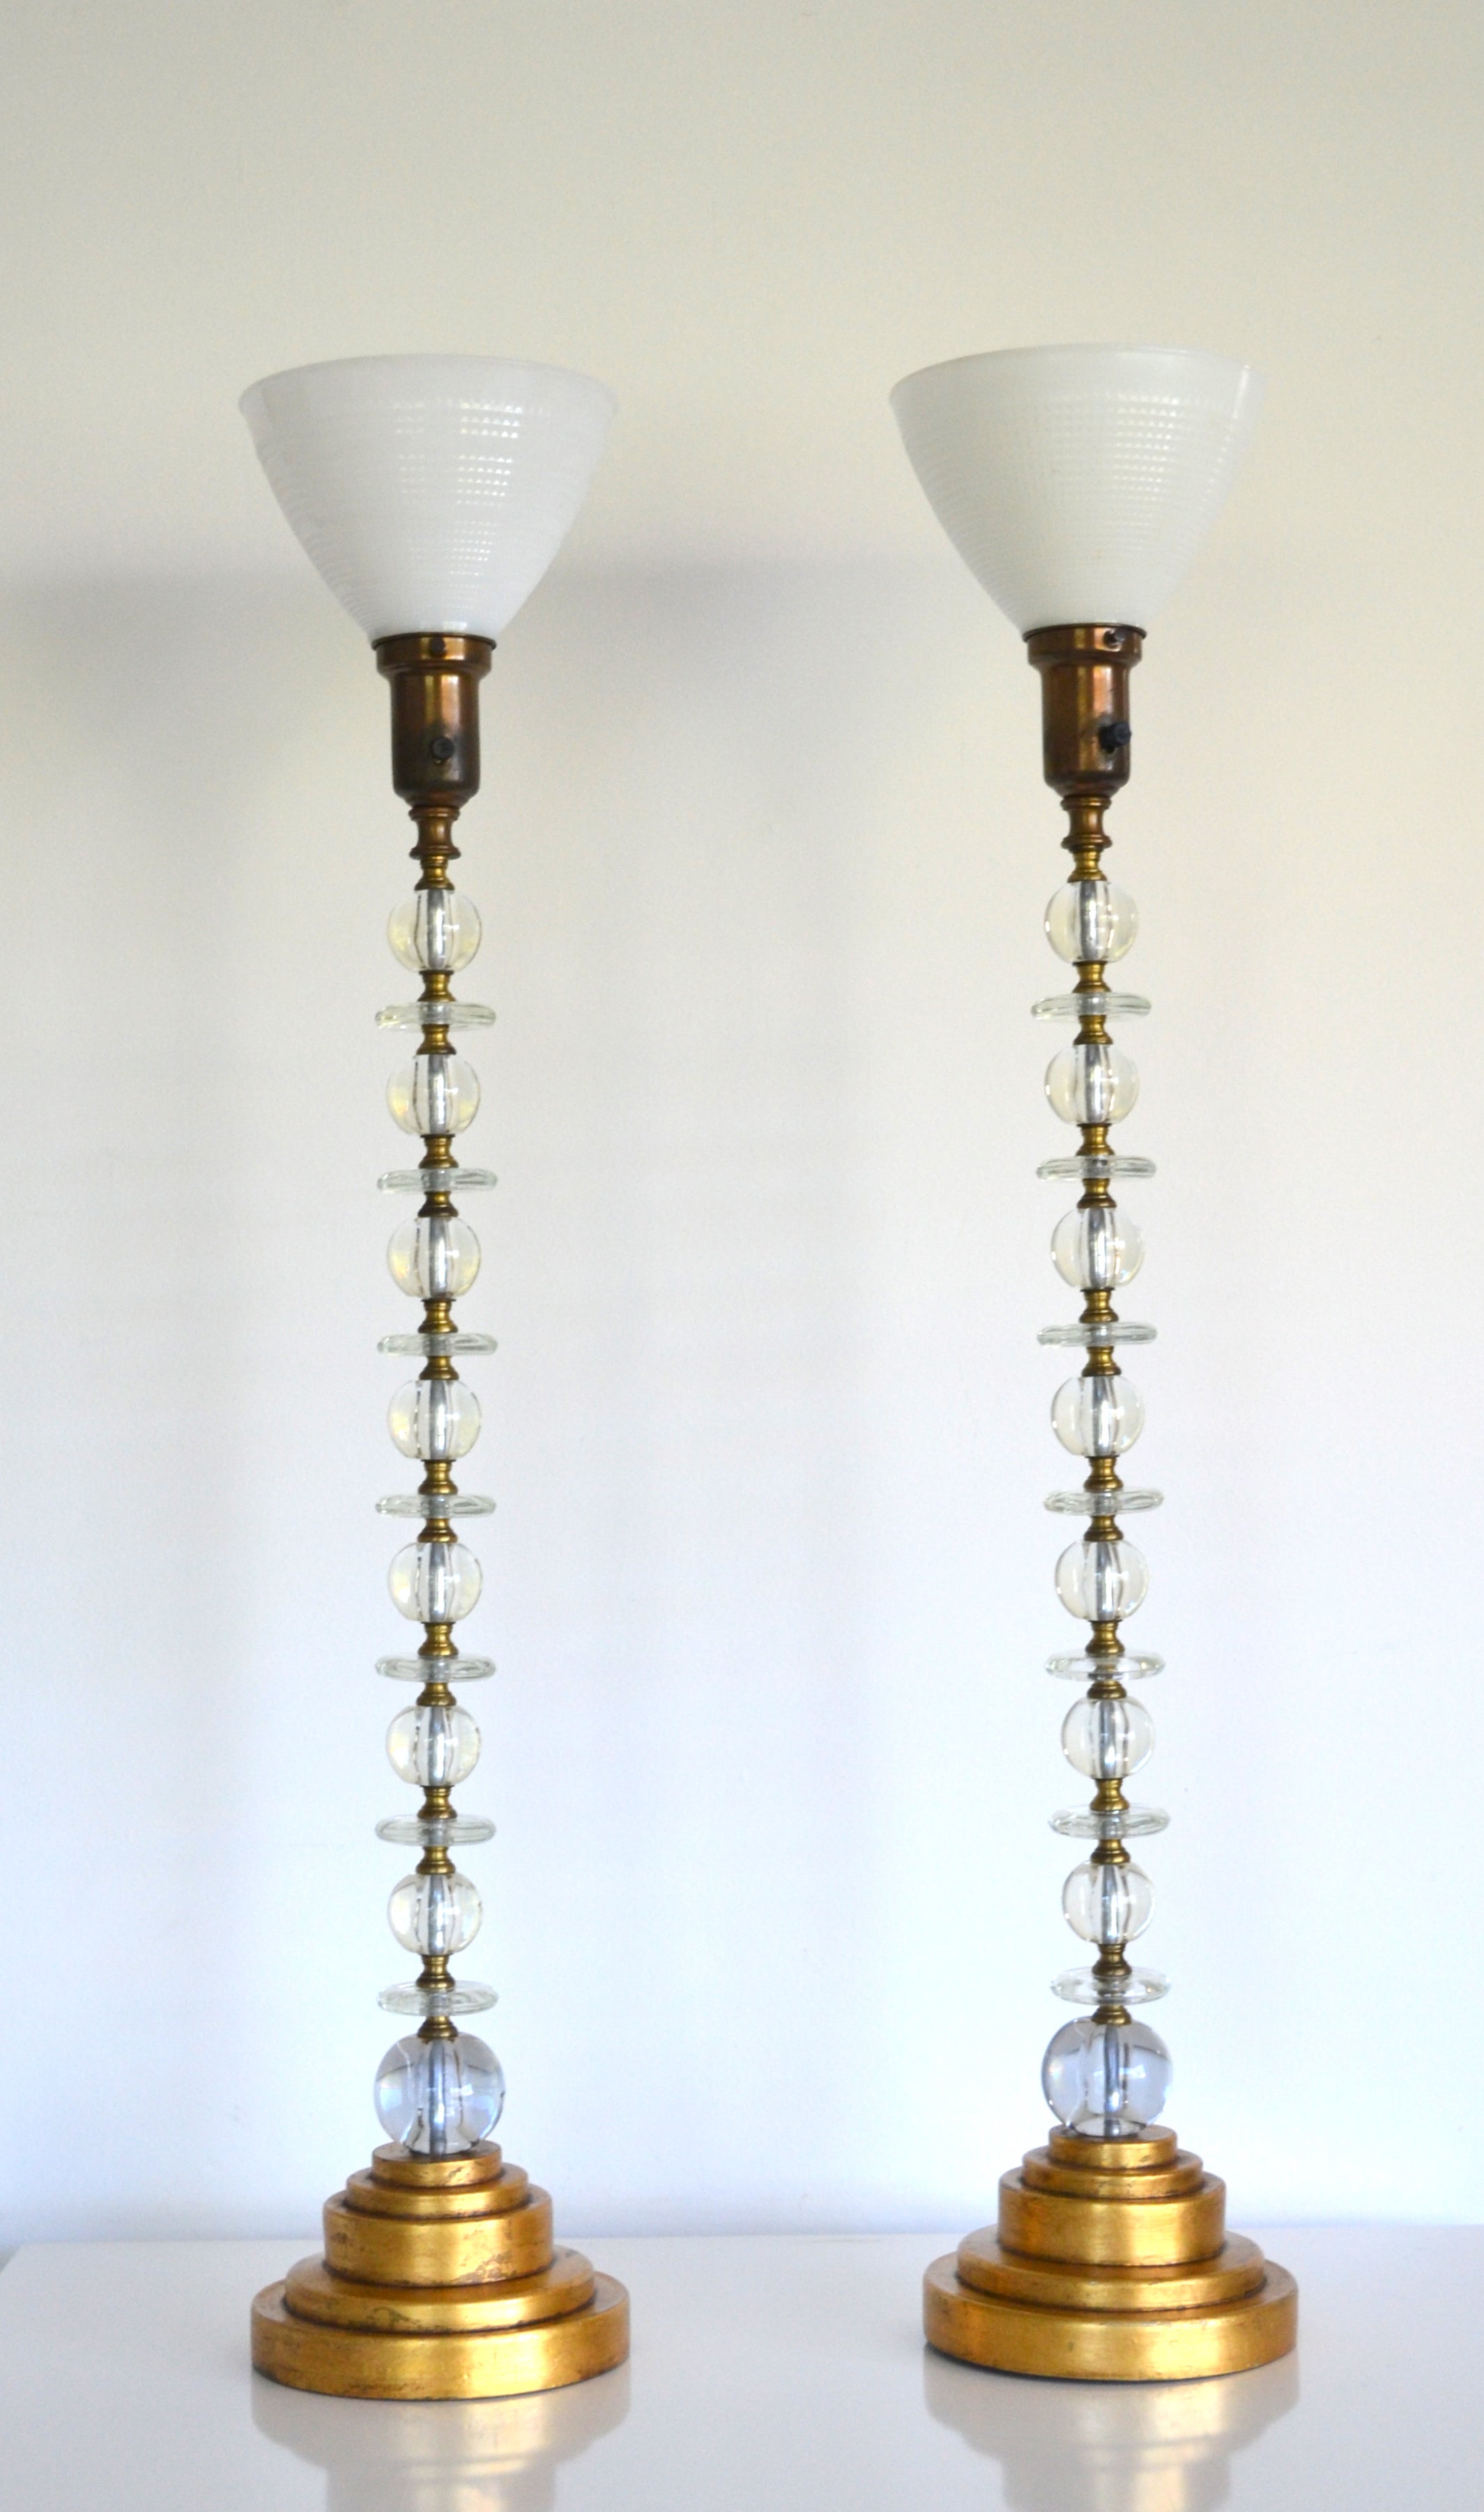 Pair of Mid-Century Modern Stacked Glass Table Lamps